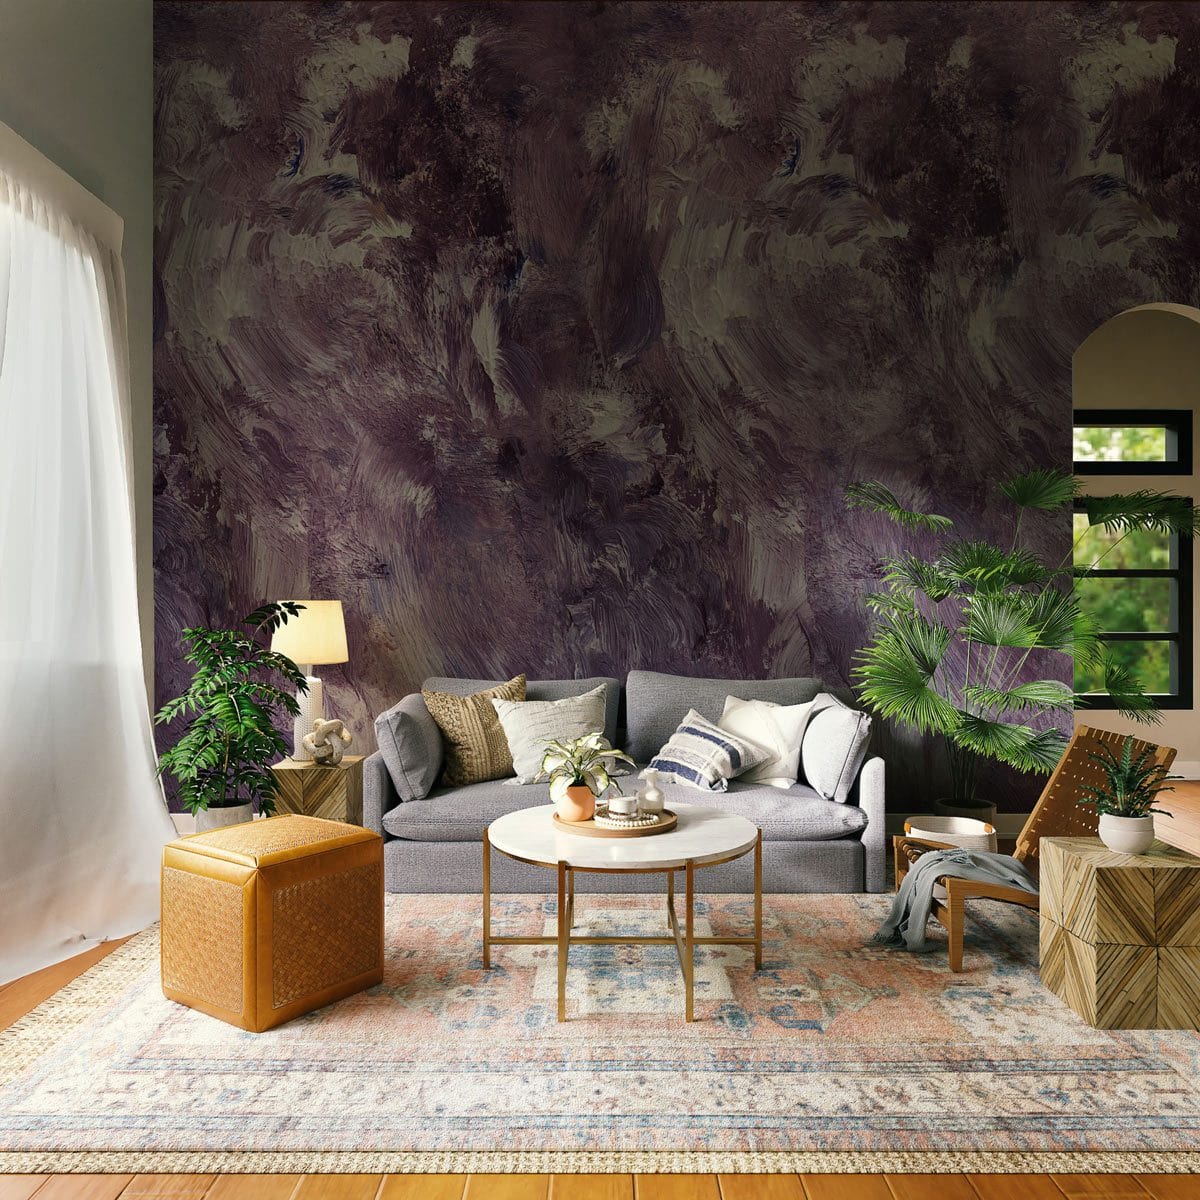 Wall Decoration Art Mural Wallpaper Featuring an Original Oil Painting in Purple